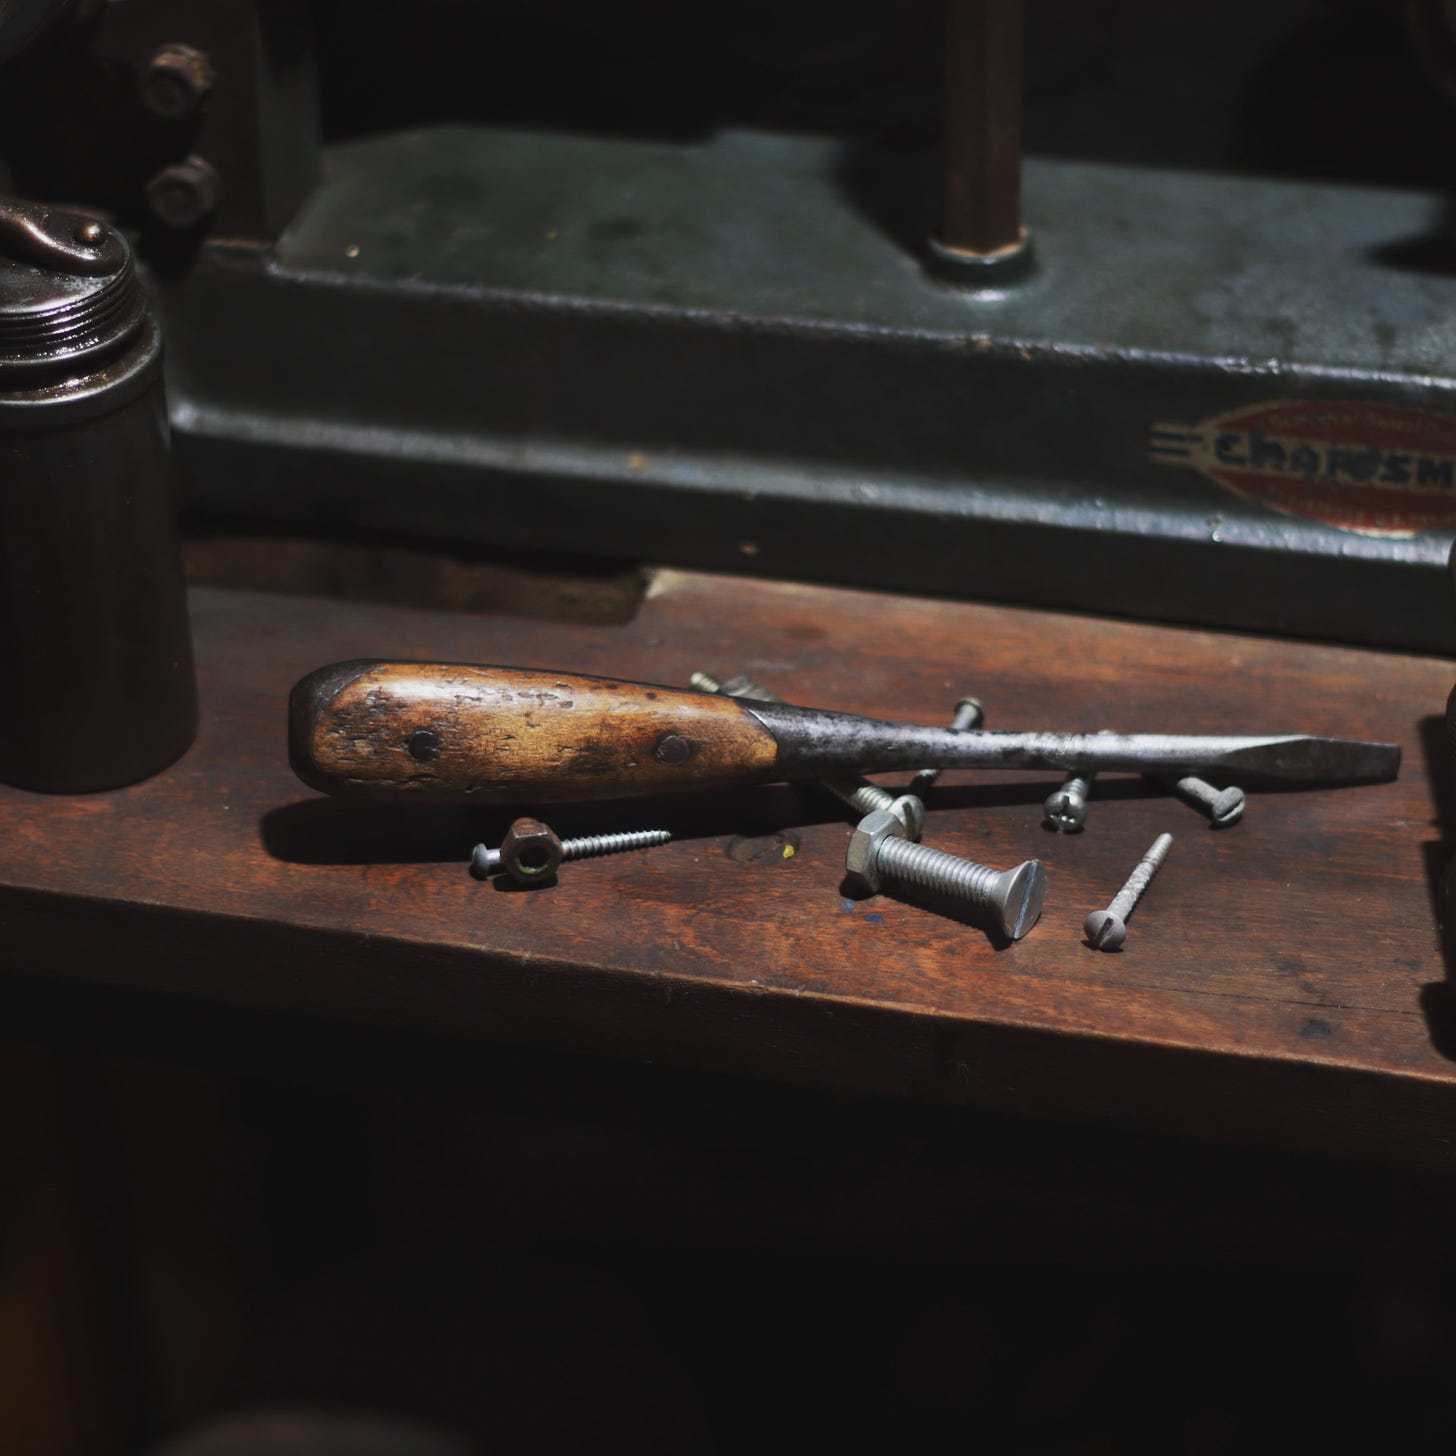 Image of an antique screwdriver on a workbench.